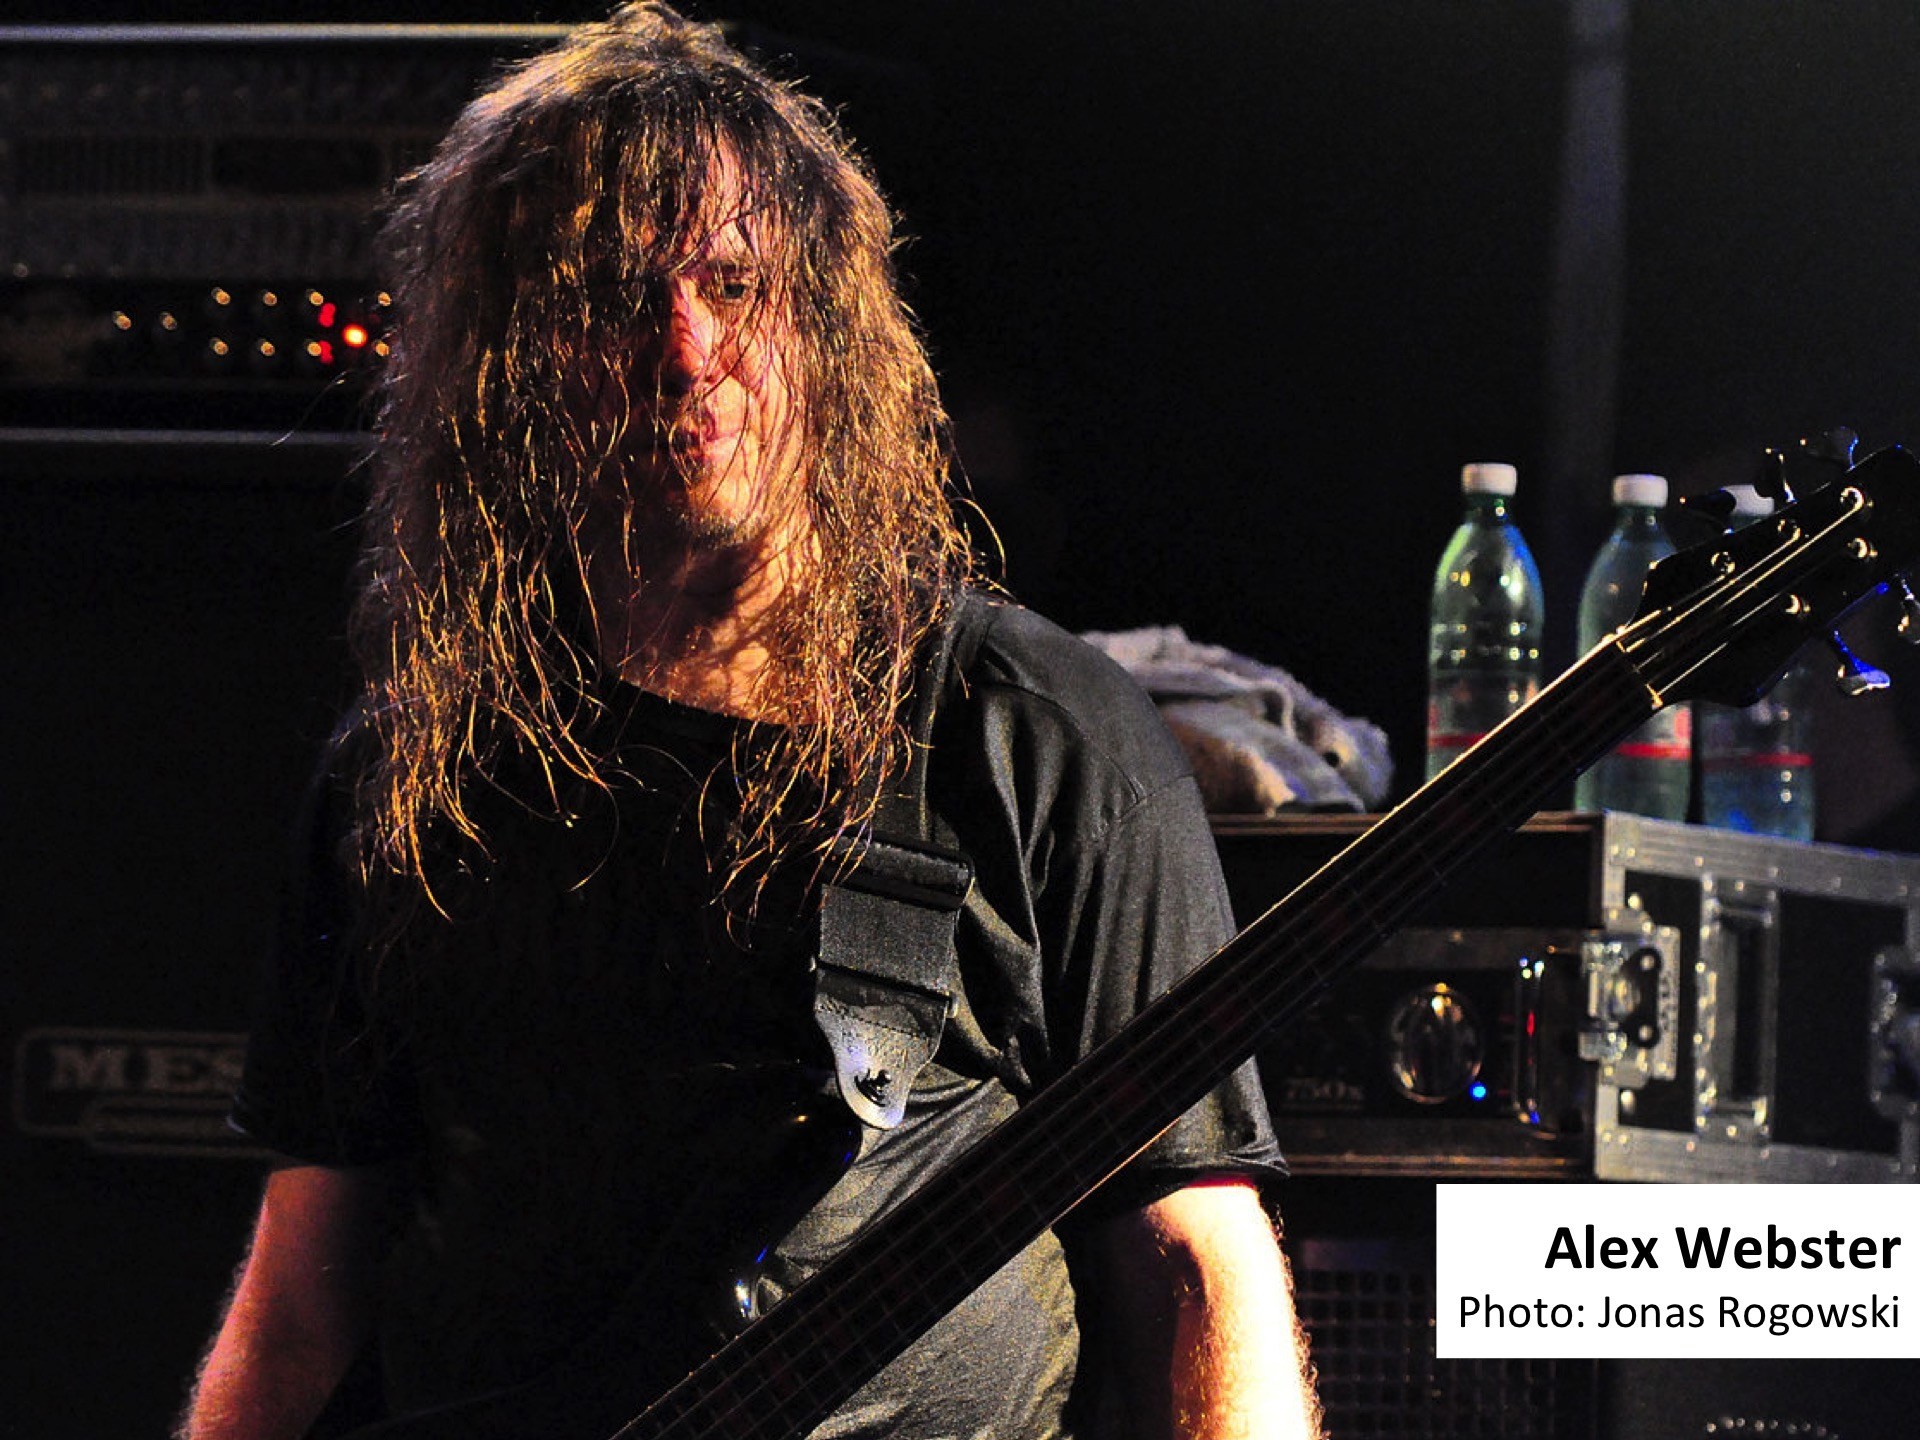 1920x1440 Of all the mentioned bass players in this top 10, Alex Webster of death  metal icons Cannibal Corpse plays the most brachial bass lines.